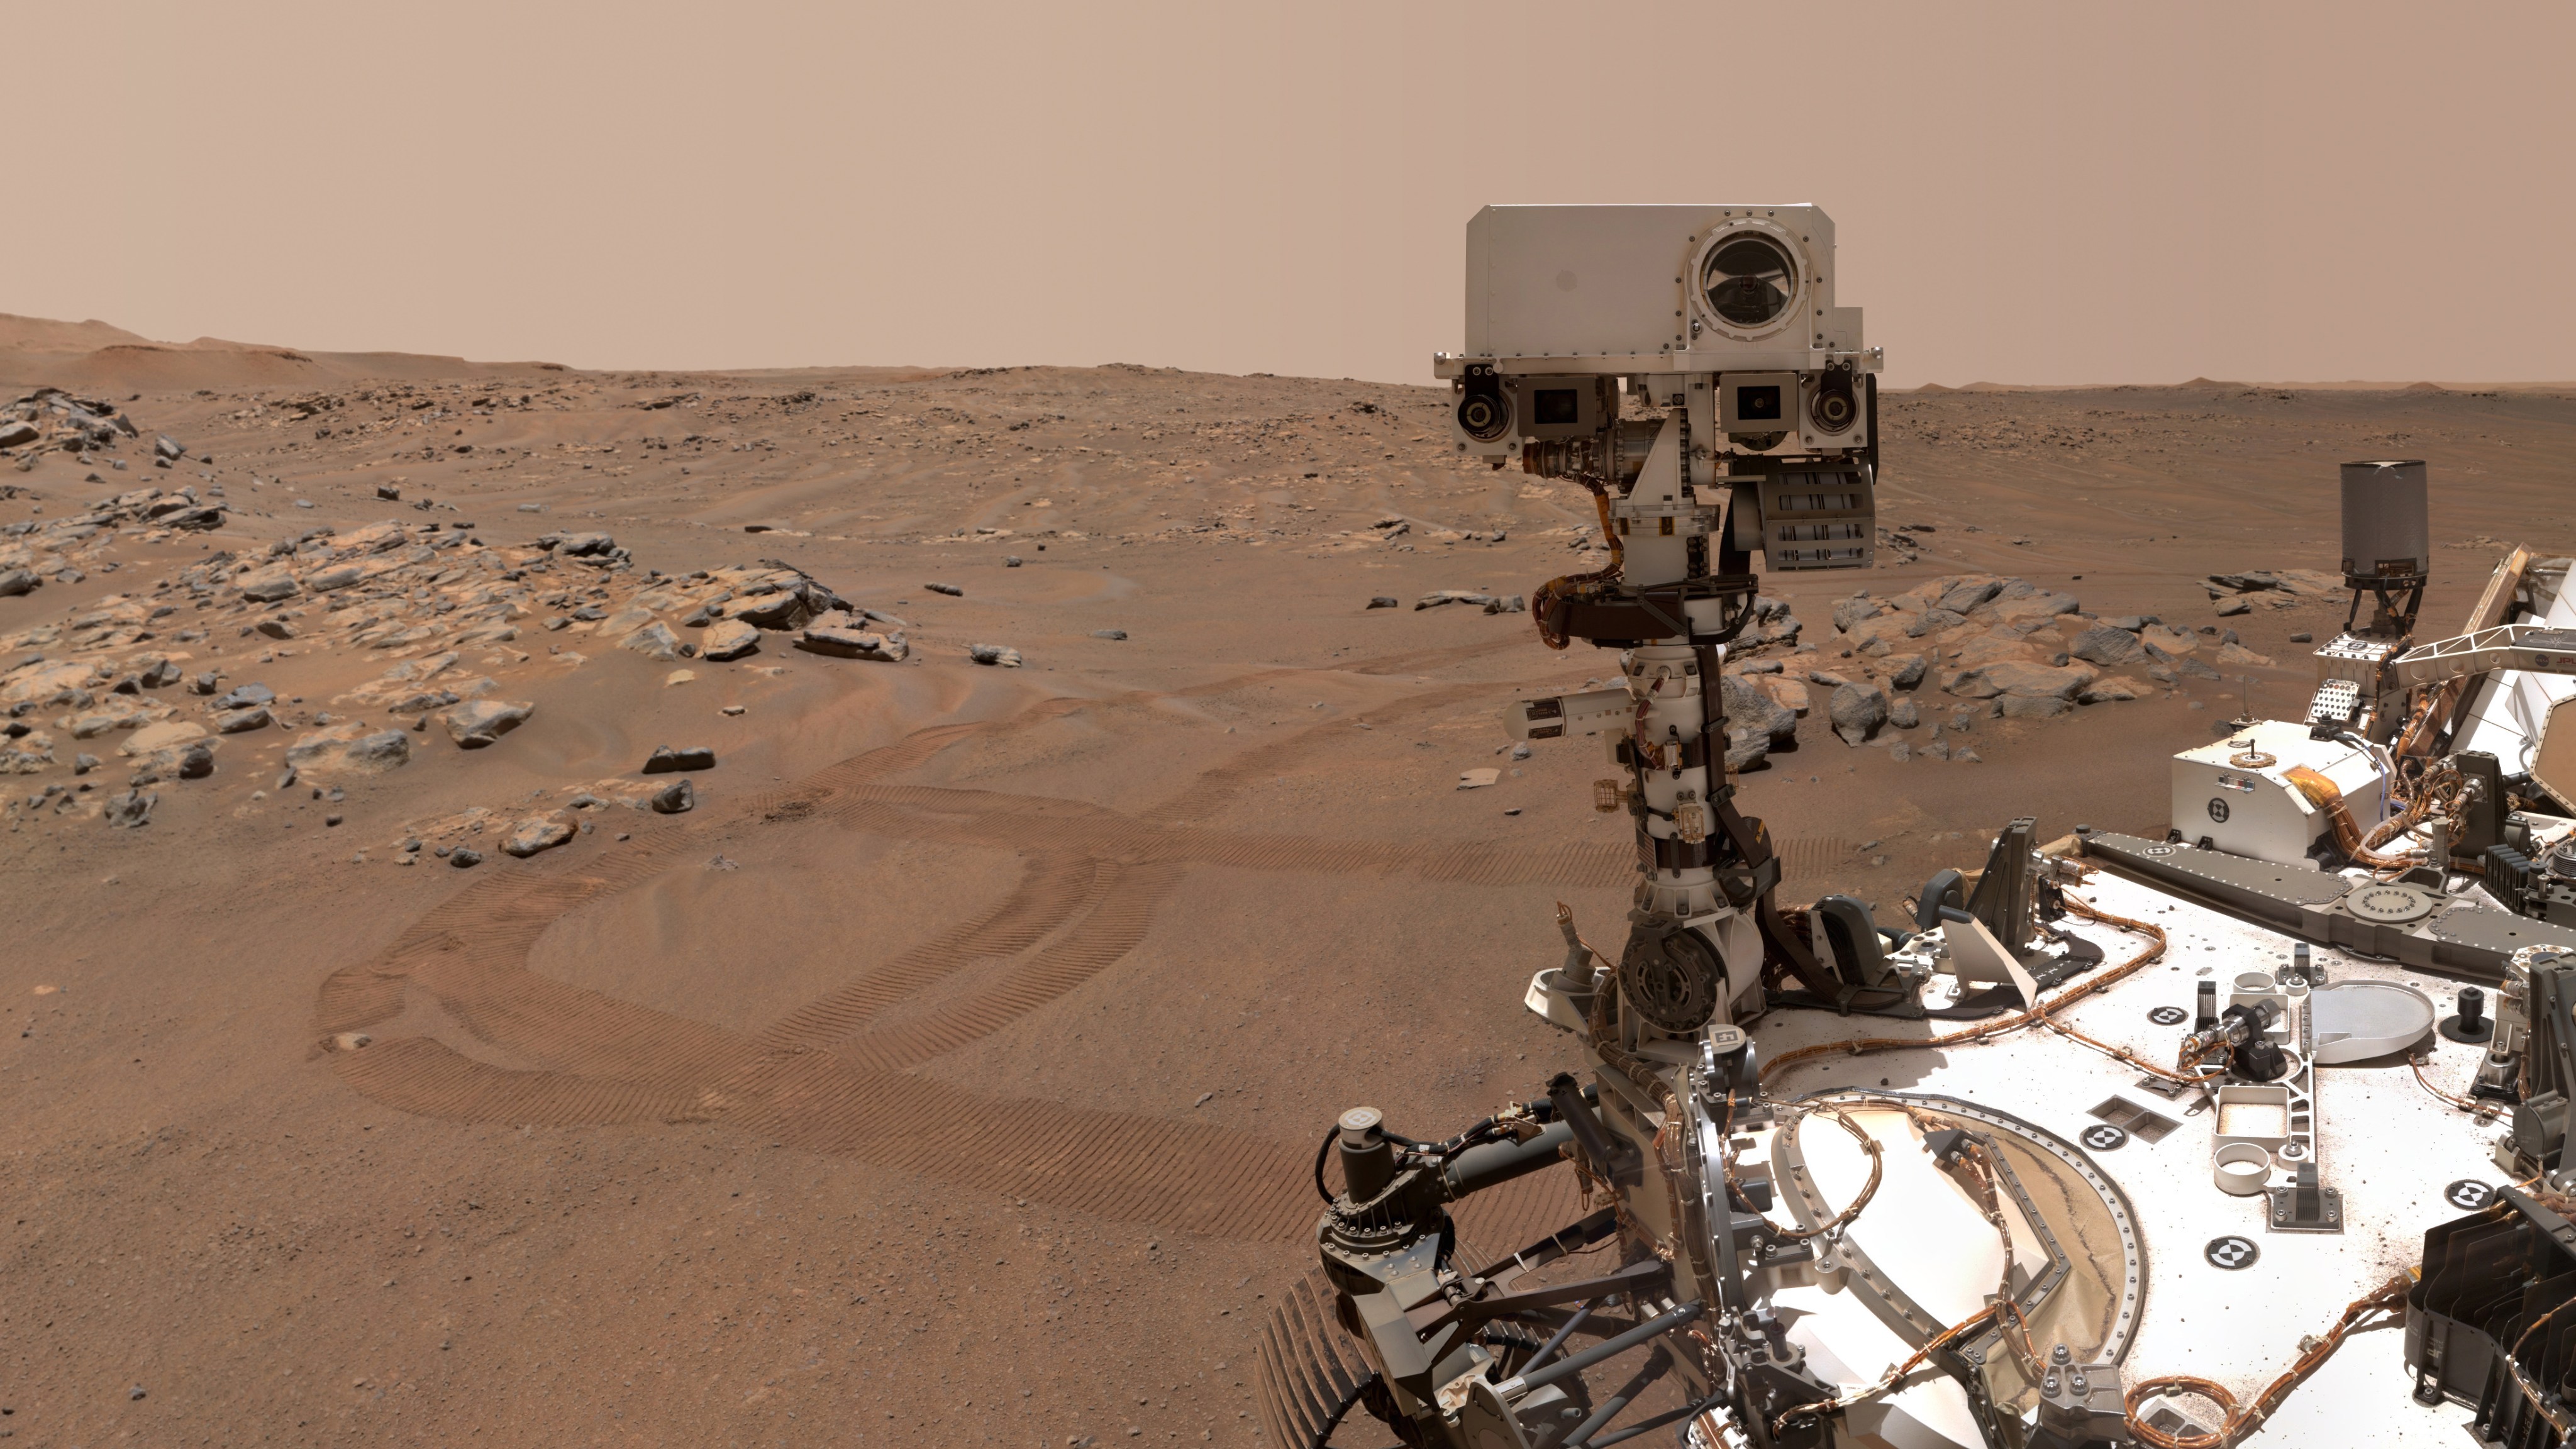 The Mars rover Perseverence is seen at right, with the rust-colored, dusty and rocky surface of Mars in the background.